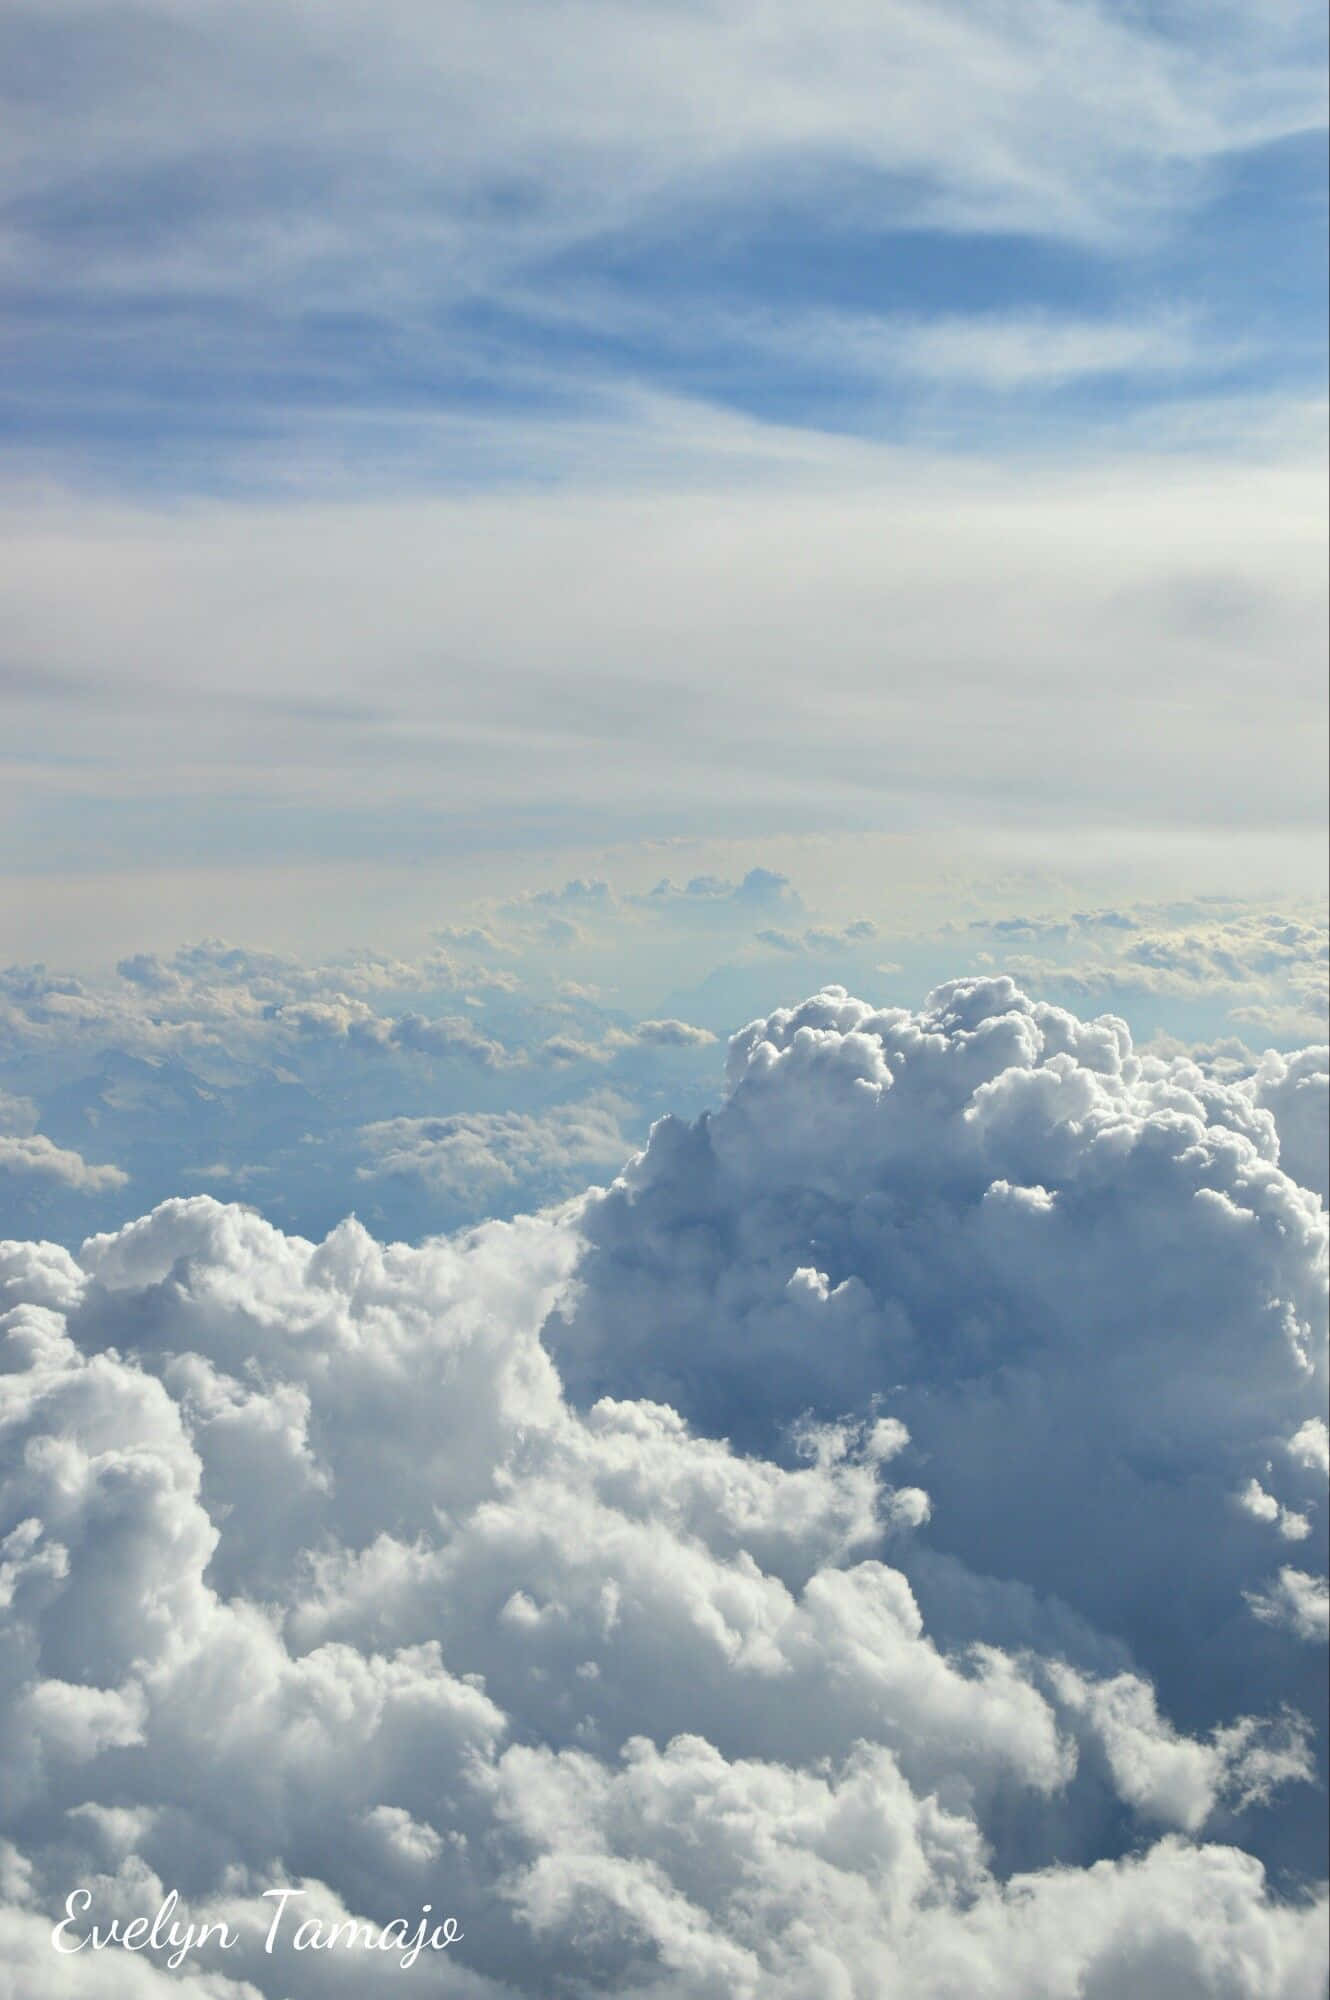 A View Of Clouds From An Airplane